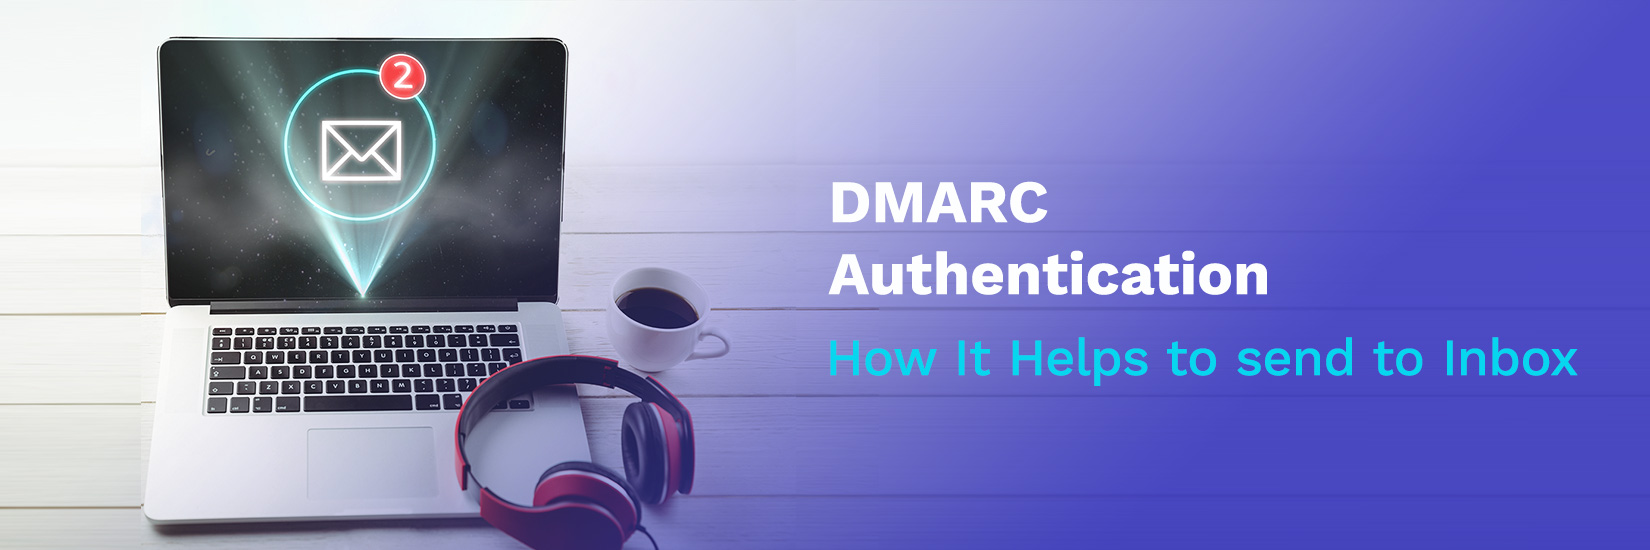 Authenticate Emails with DMARC for Better Deliverability